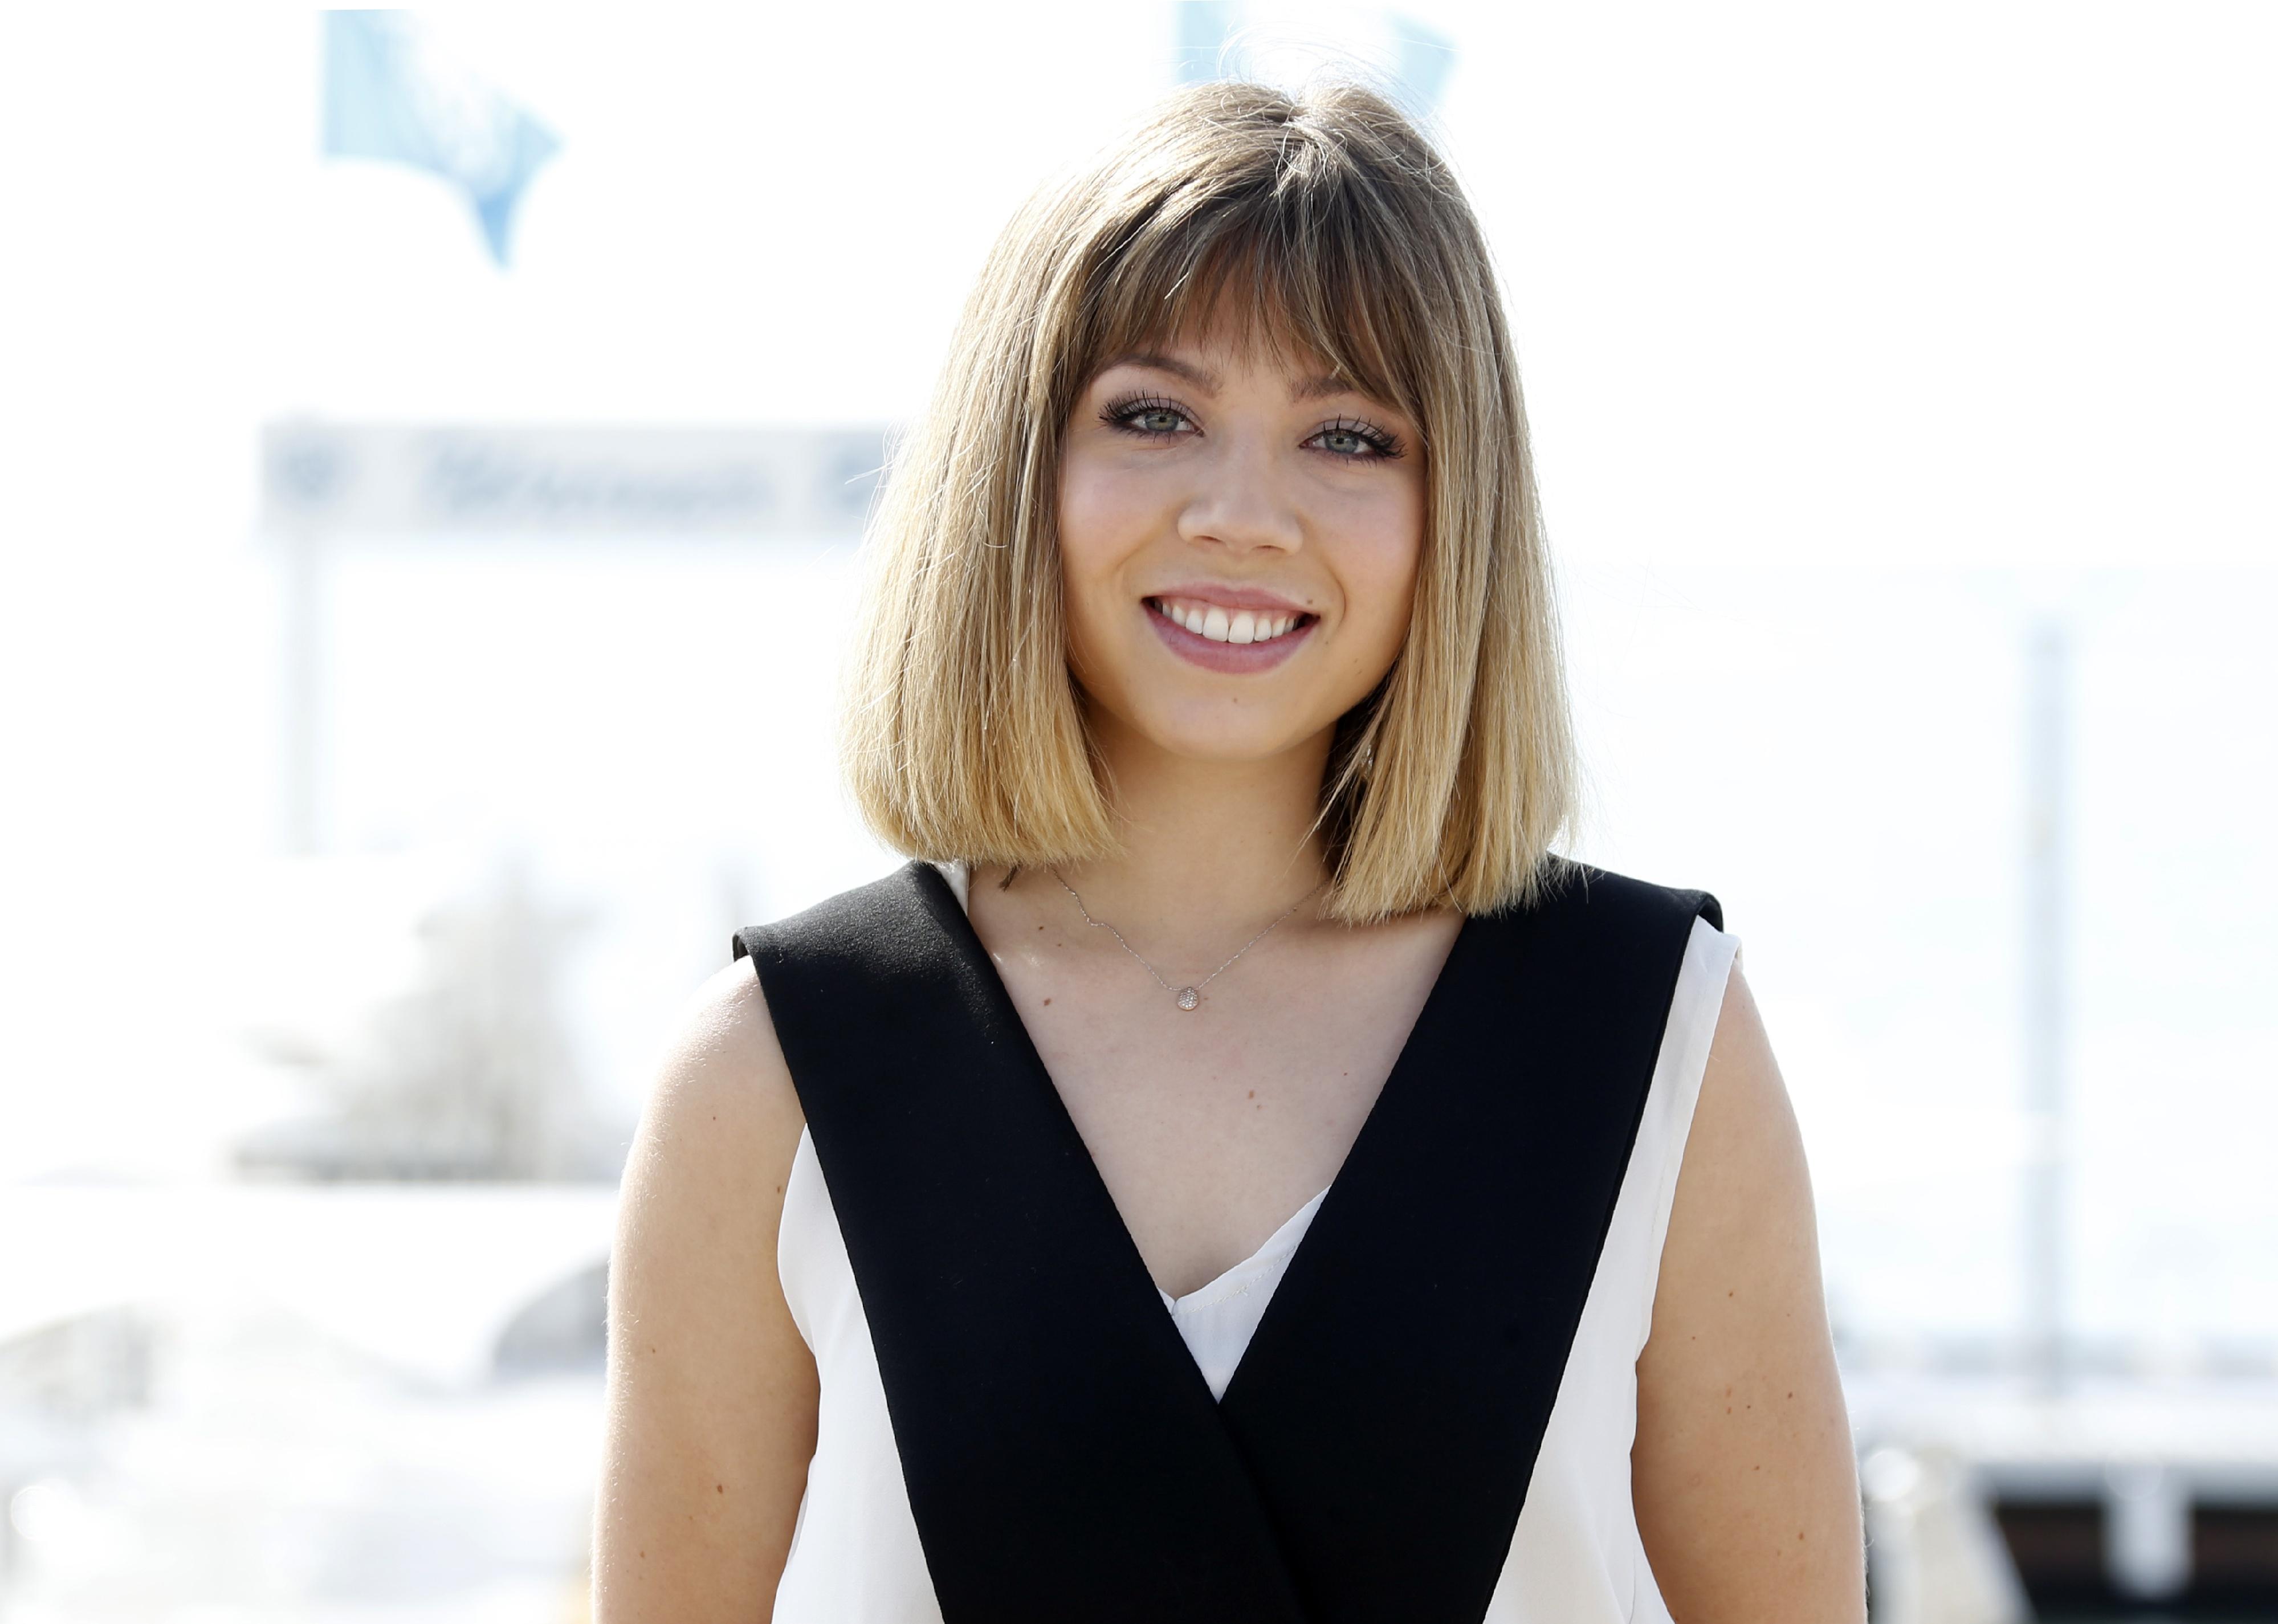 Jennette McCurdy poses for the photocall of the TV series "Between" 